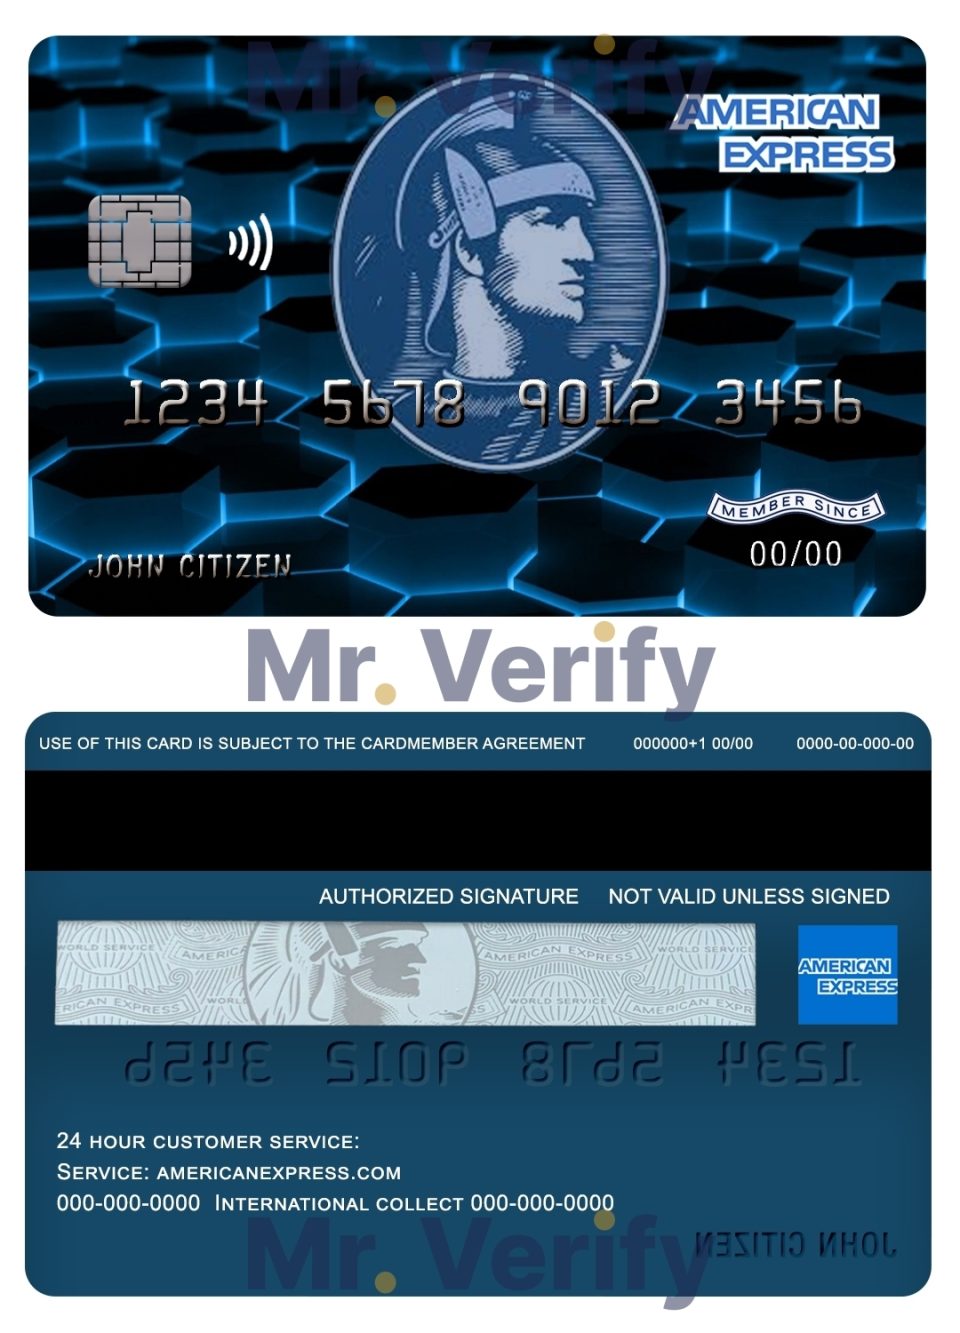 Editable USA New York American Express Blue bank card Templates in PSD Format